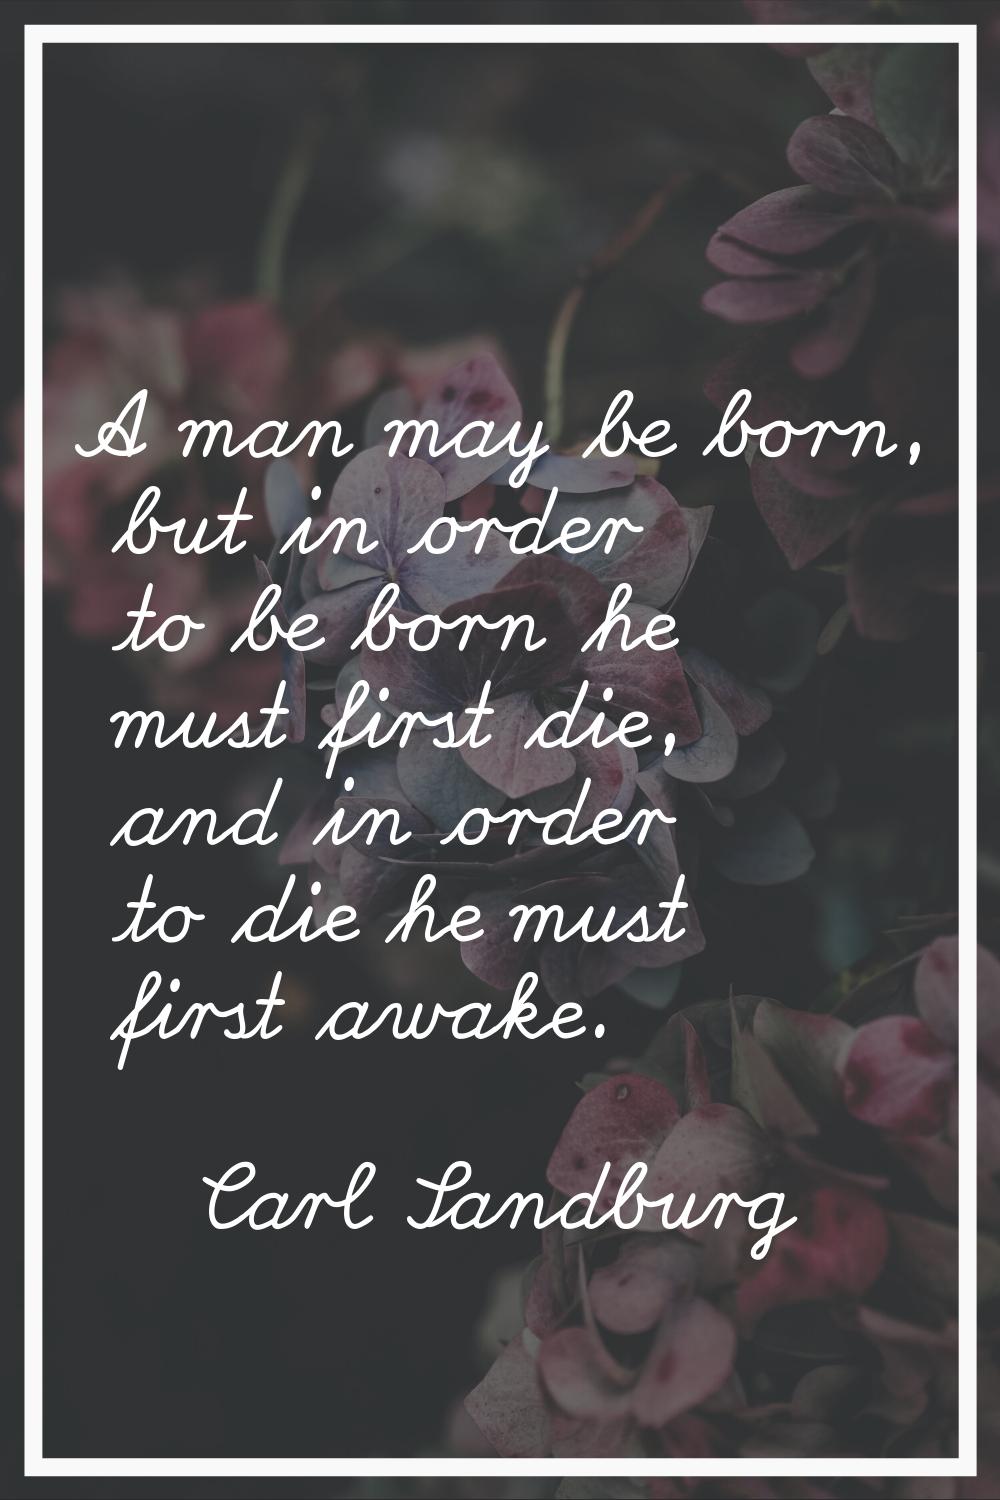 A man may be born, but in order to be born he must first die, and in order to die he must first awa